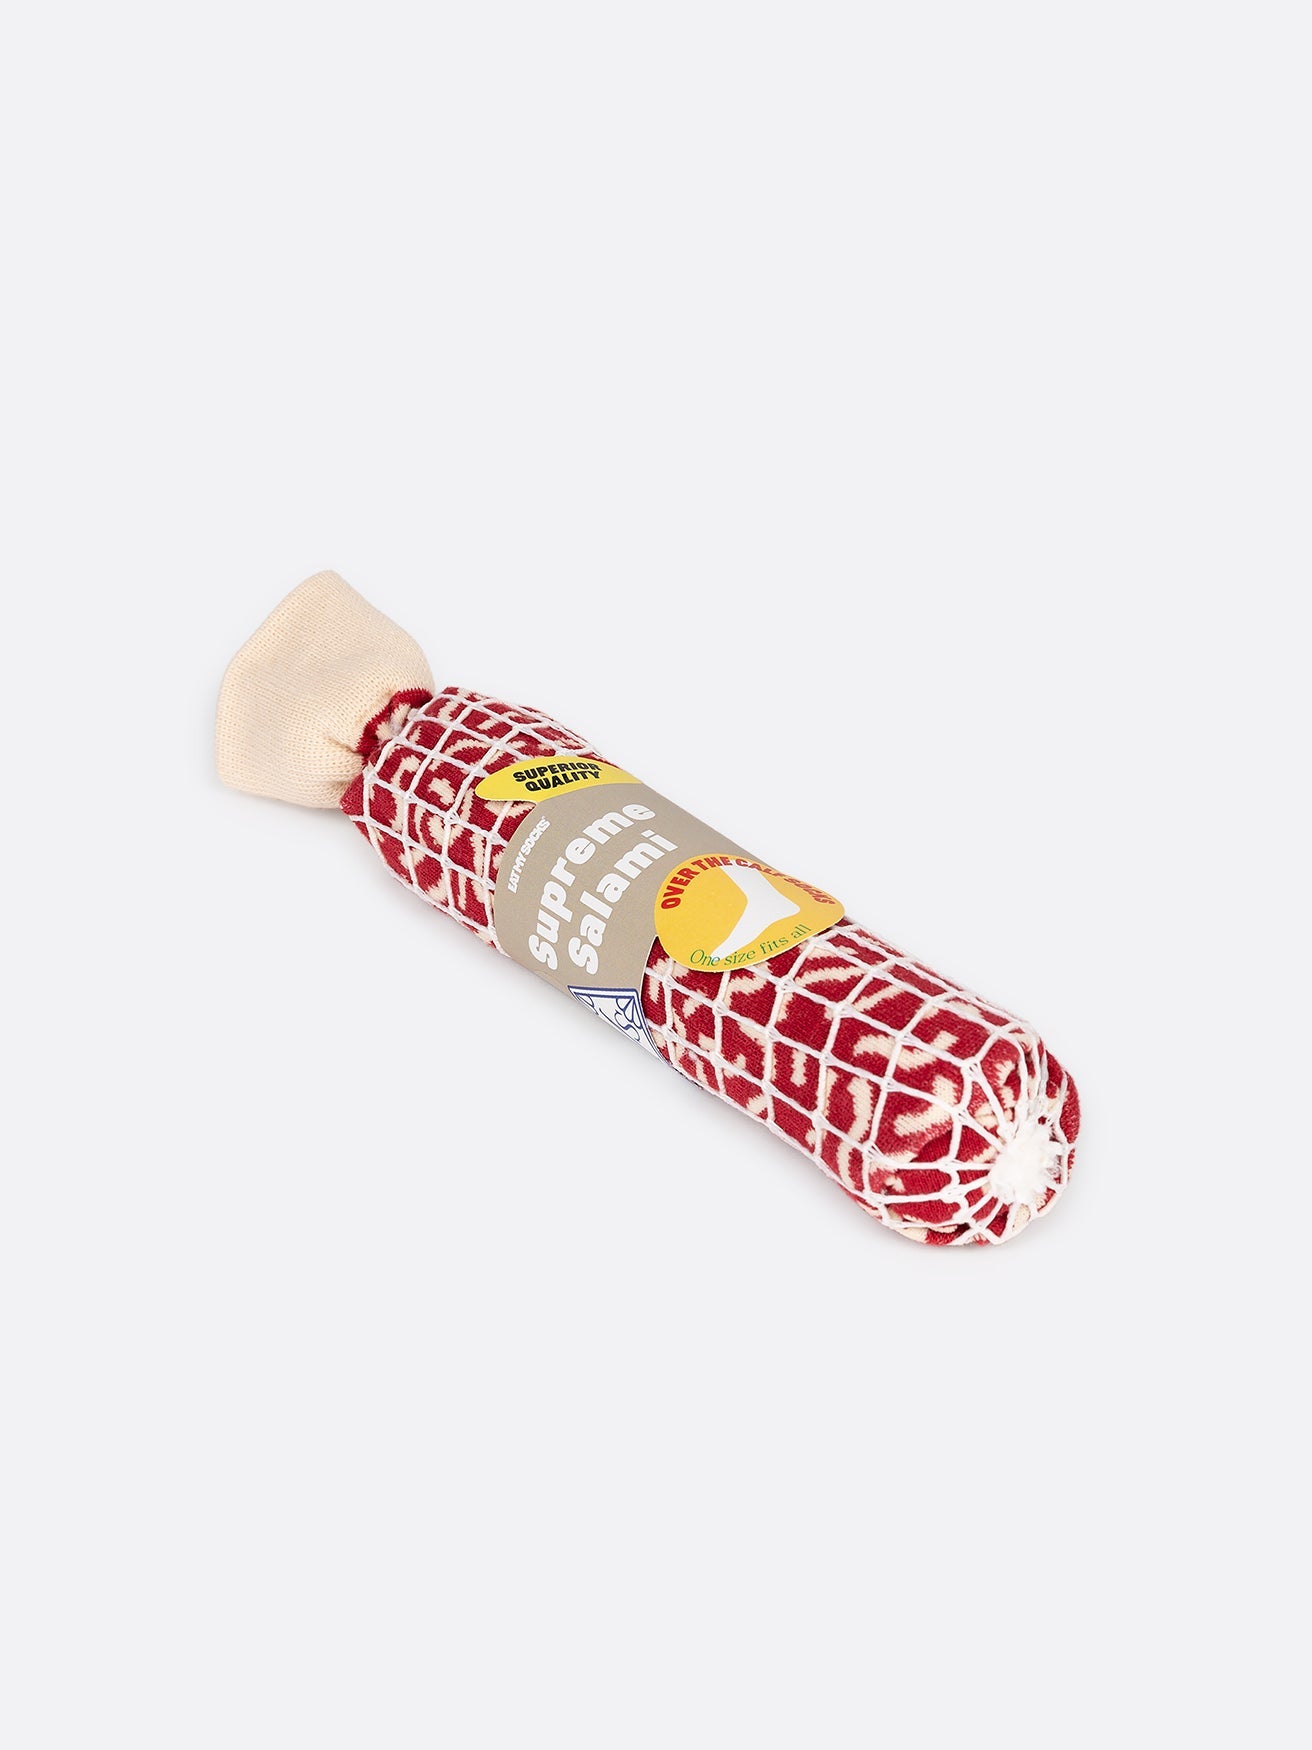 Salami socks packaged in a casing roll 